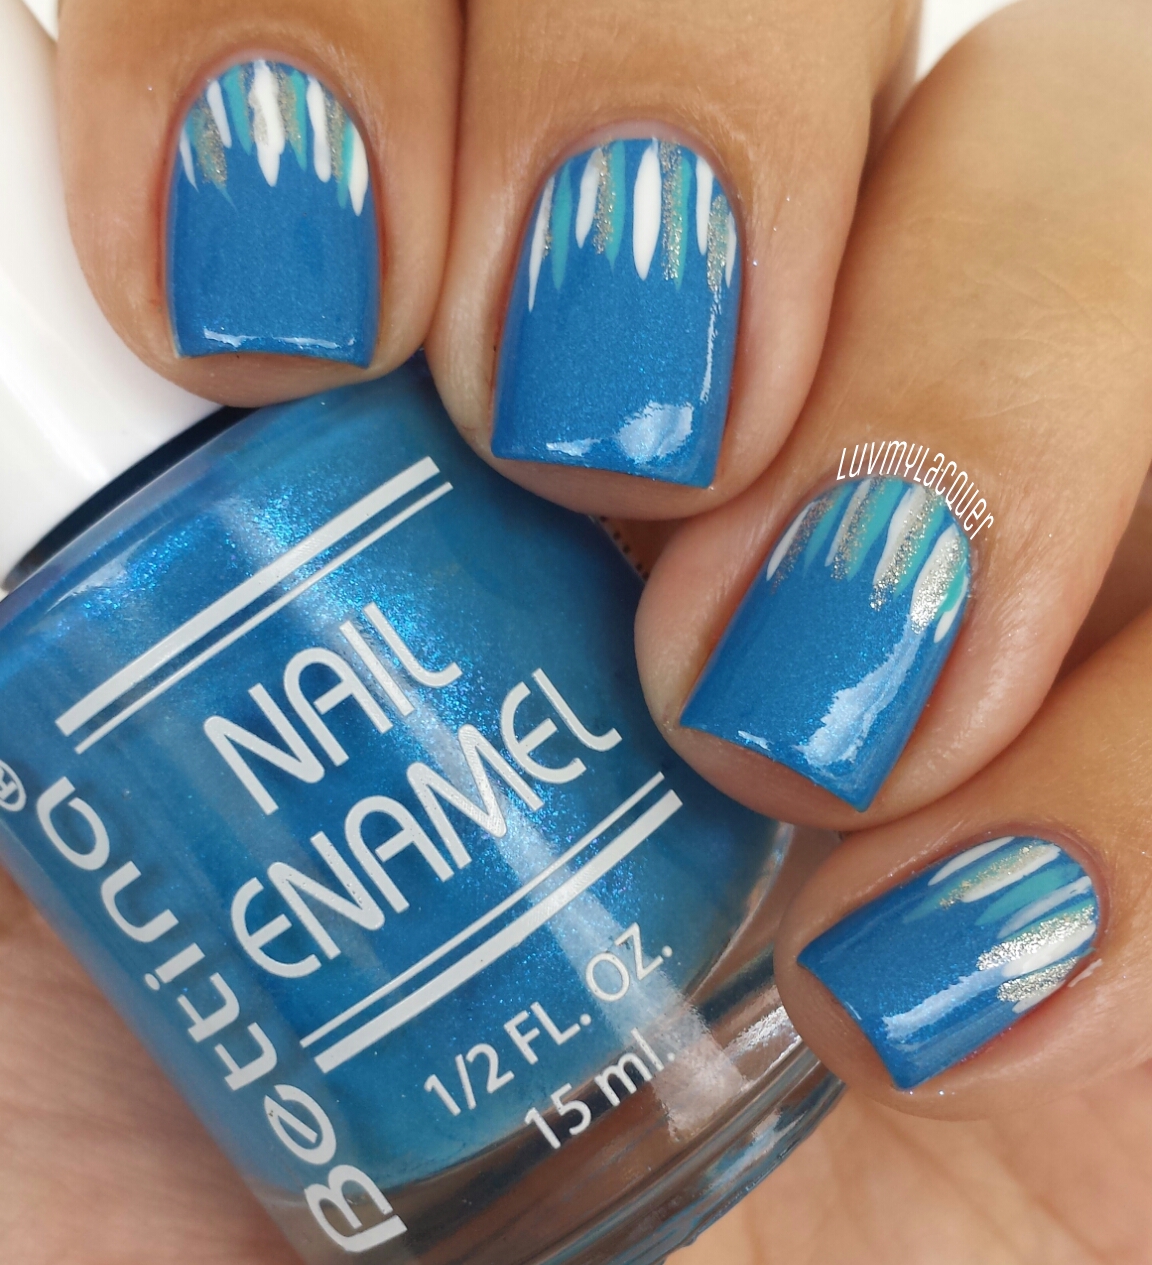 LuvMyLacquer: 31DC2013 Day 5 - Blue Nails